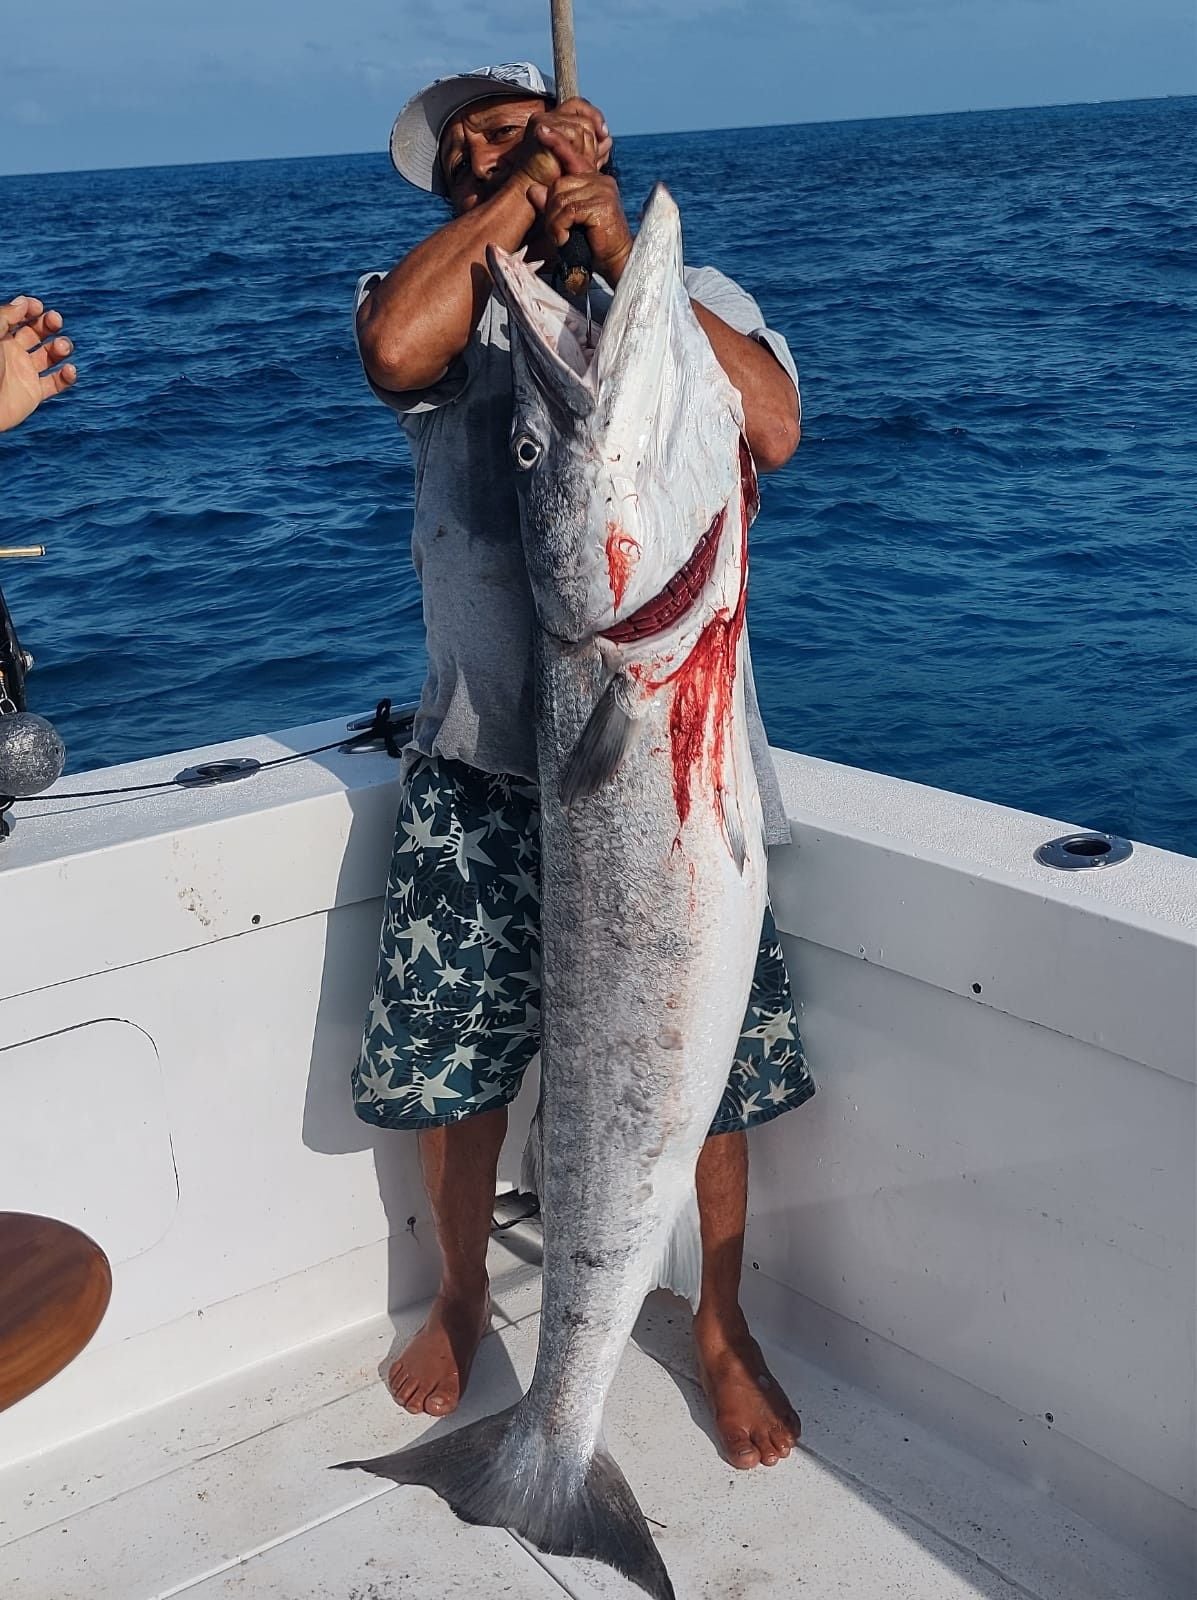 your biggest barracuda? Show your picture here¡ - The Hull Truth - Boating  and Fishing Forum